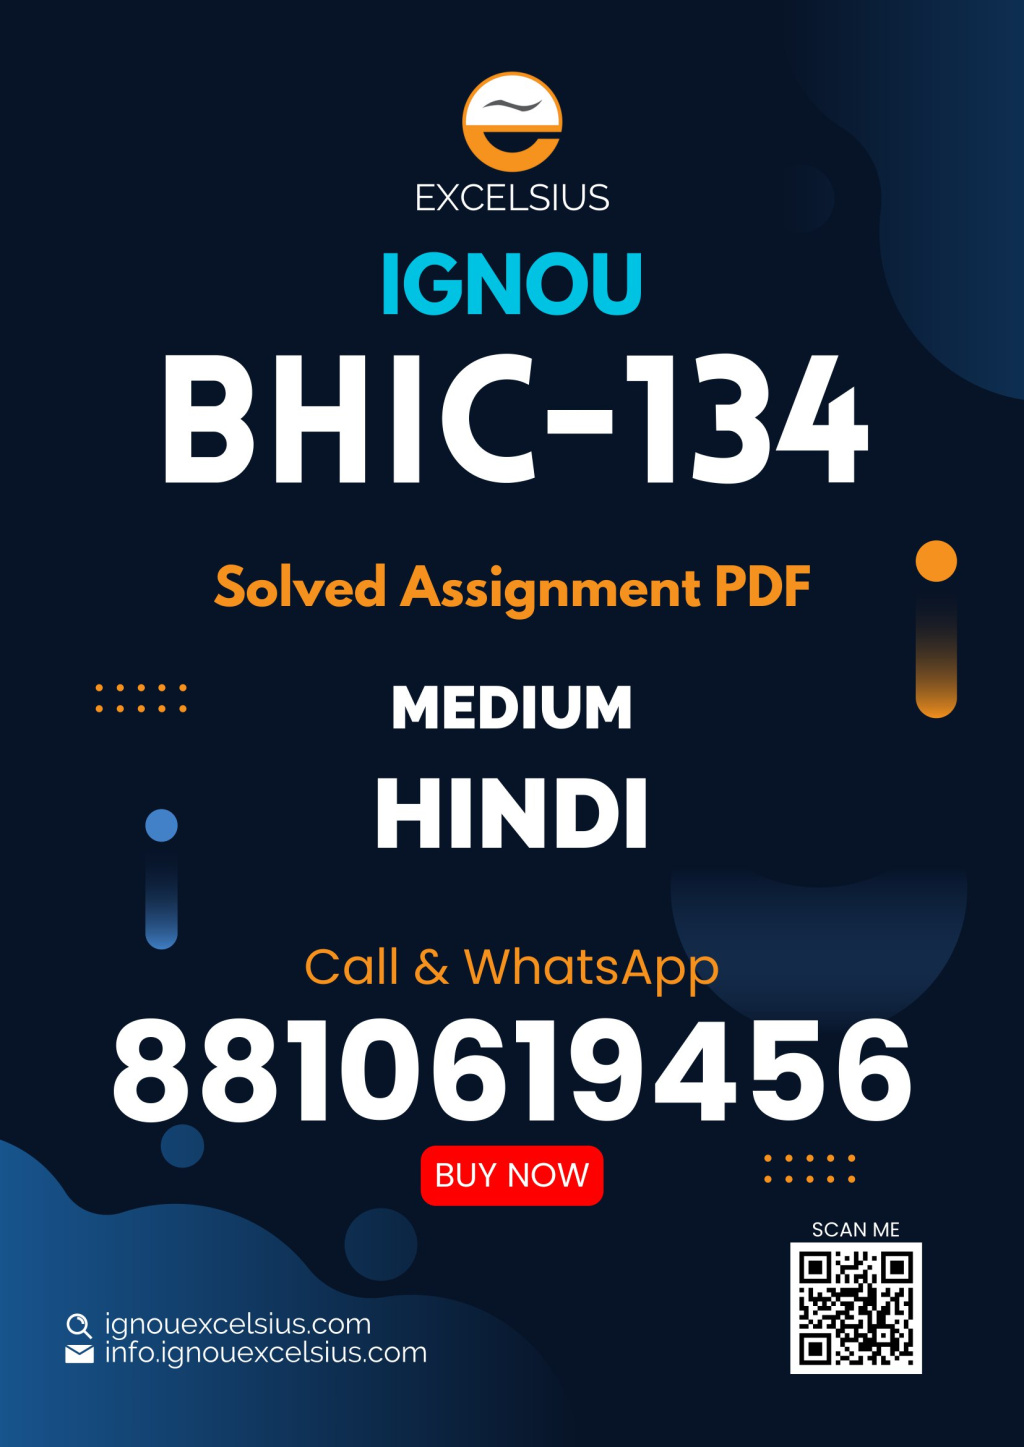 IGNOU BHIC-134 - History of India: 1707-1950 Latest Solved Assignment-July 2022 – January 2023